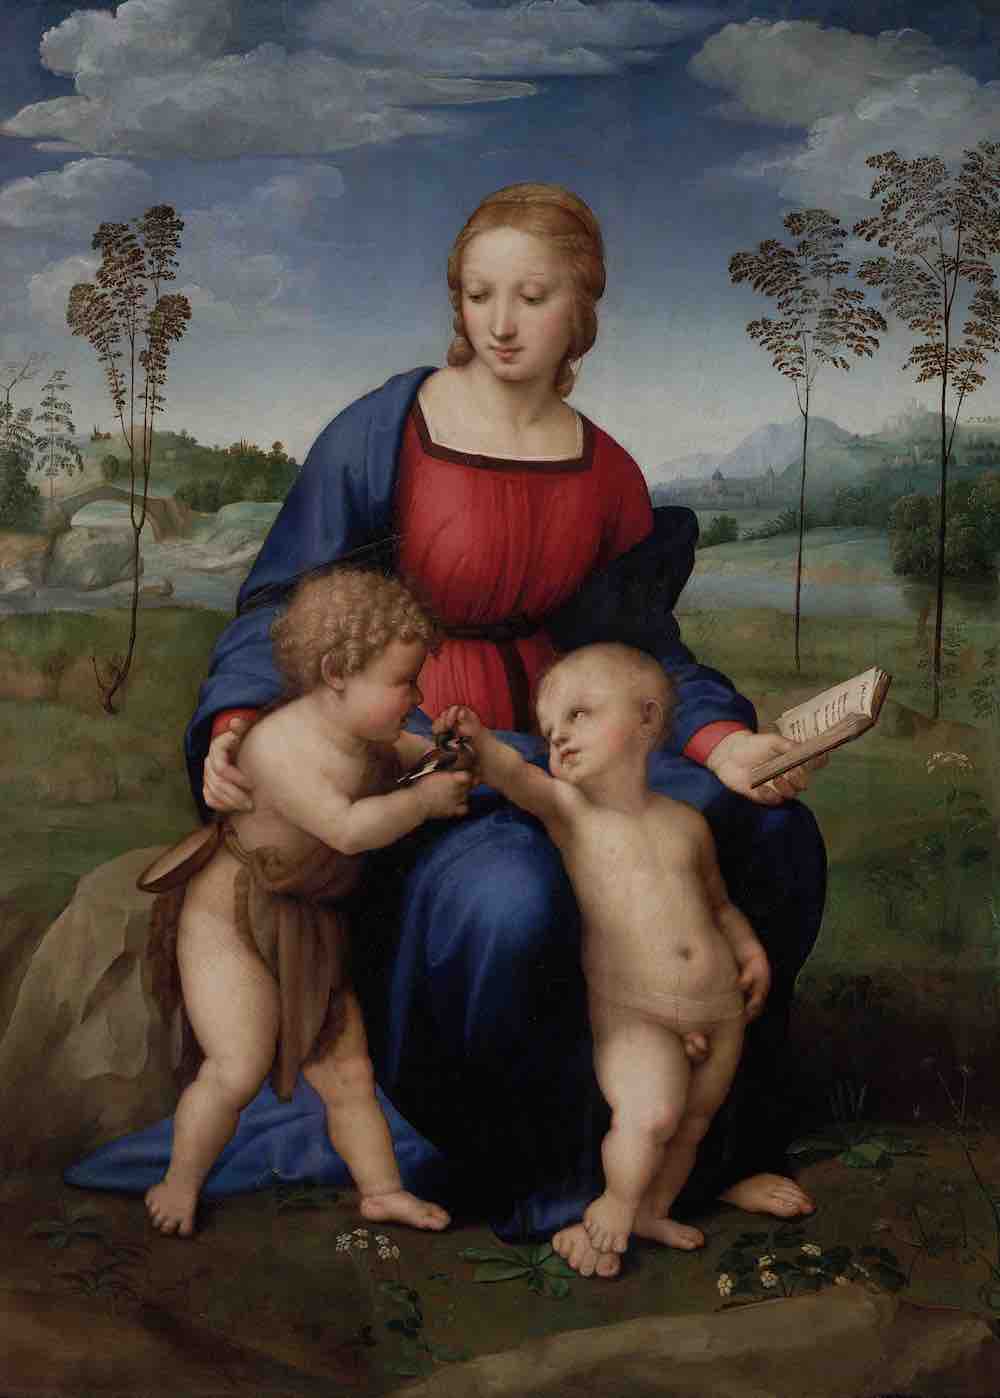 Florence In the Footsteps of Raphael